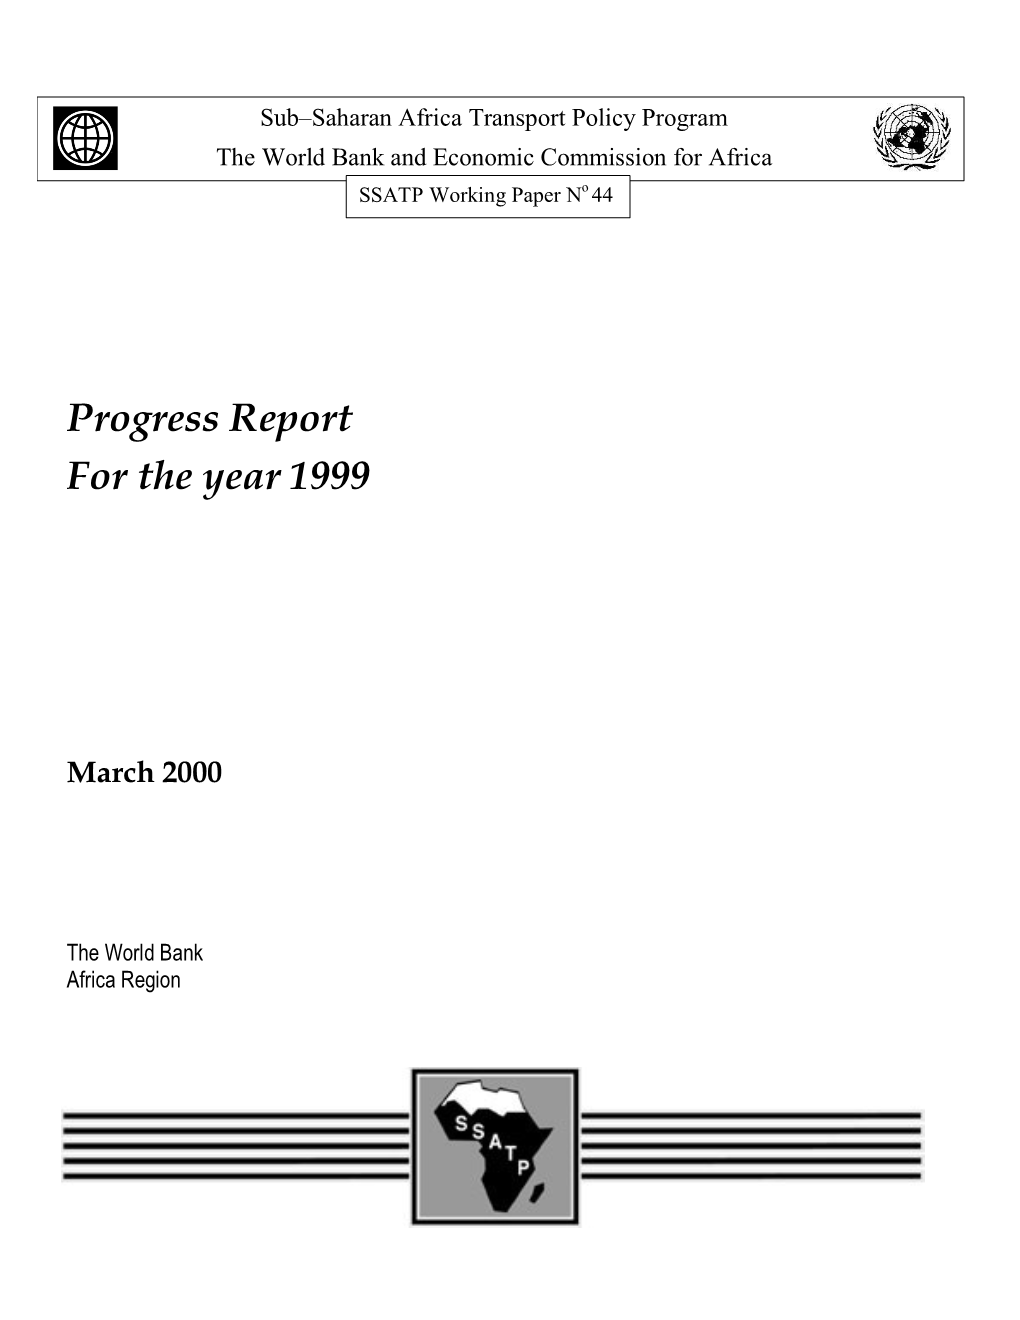 Progress Report for the Year 1999